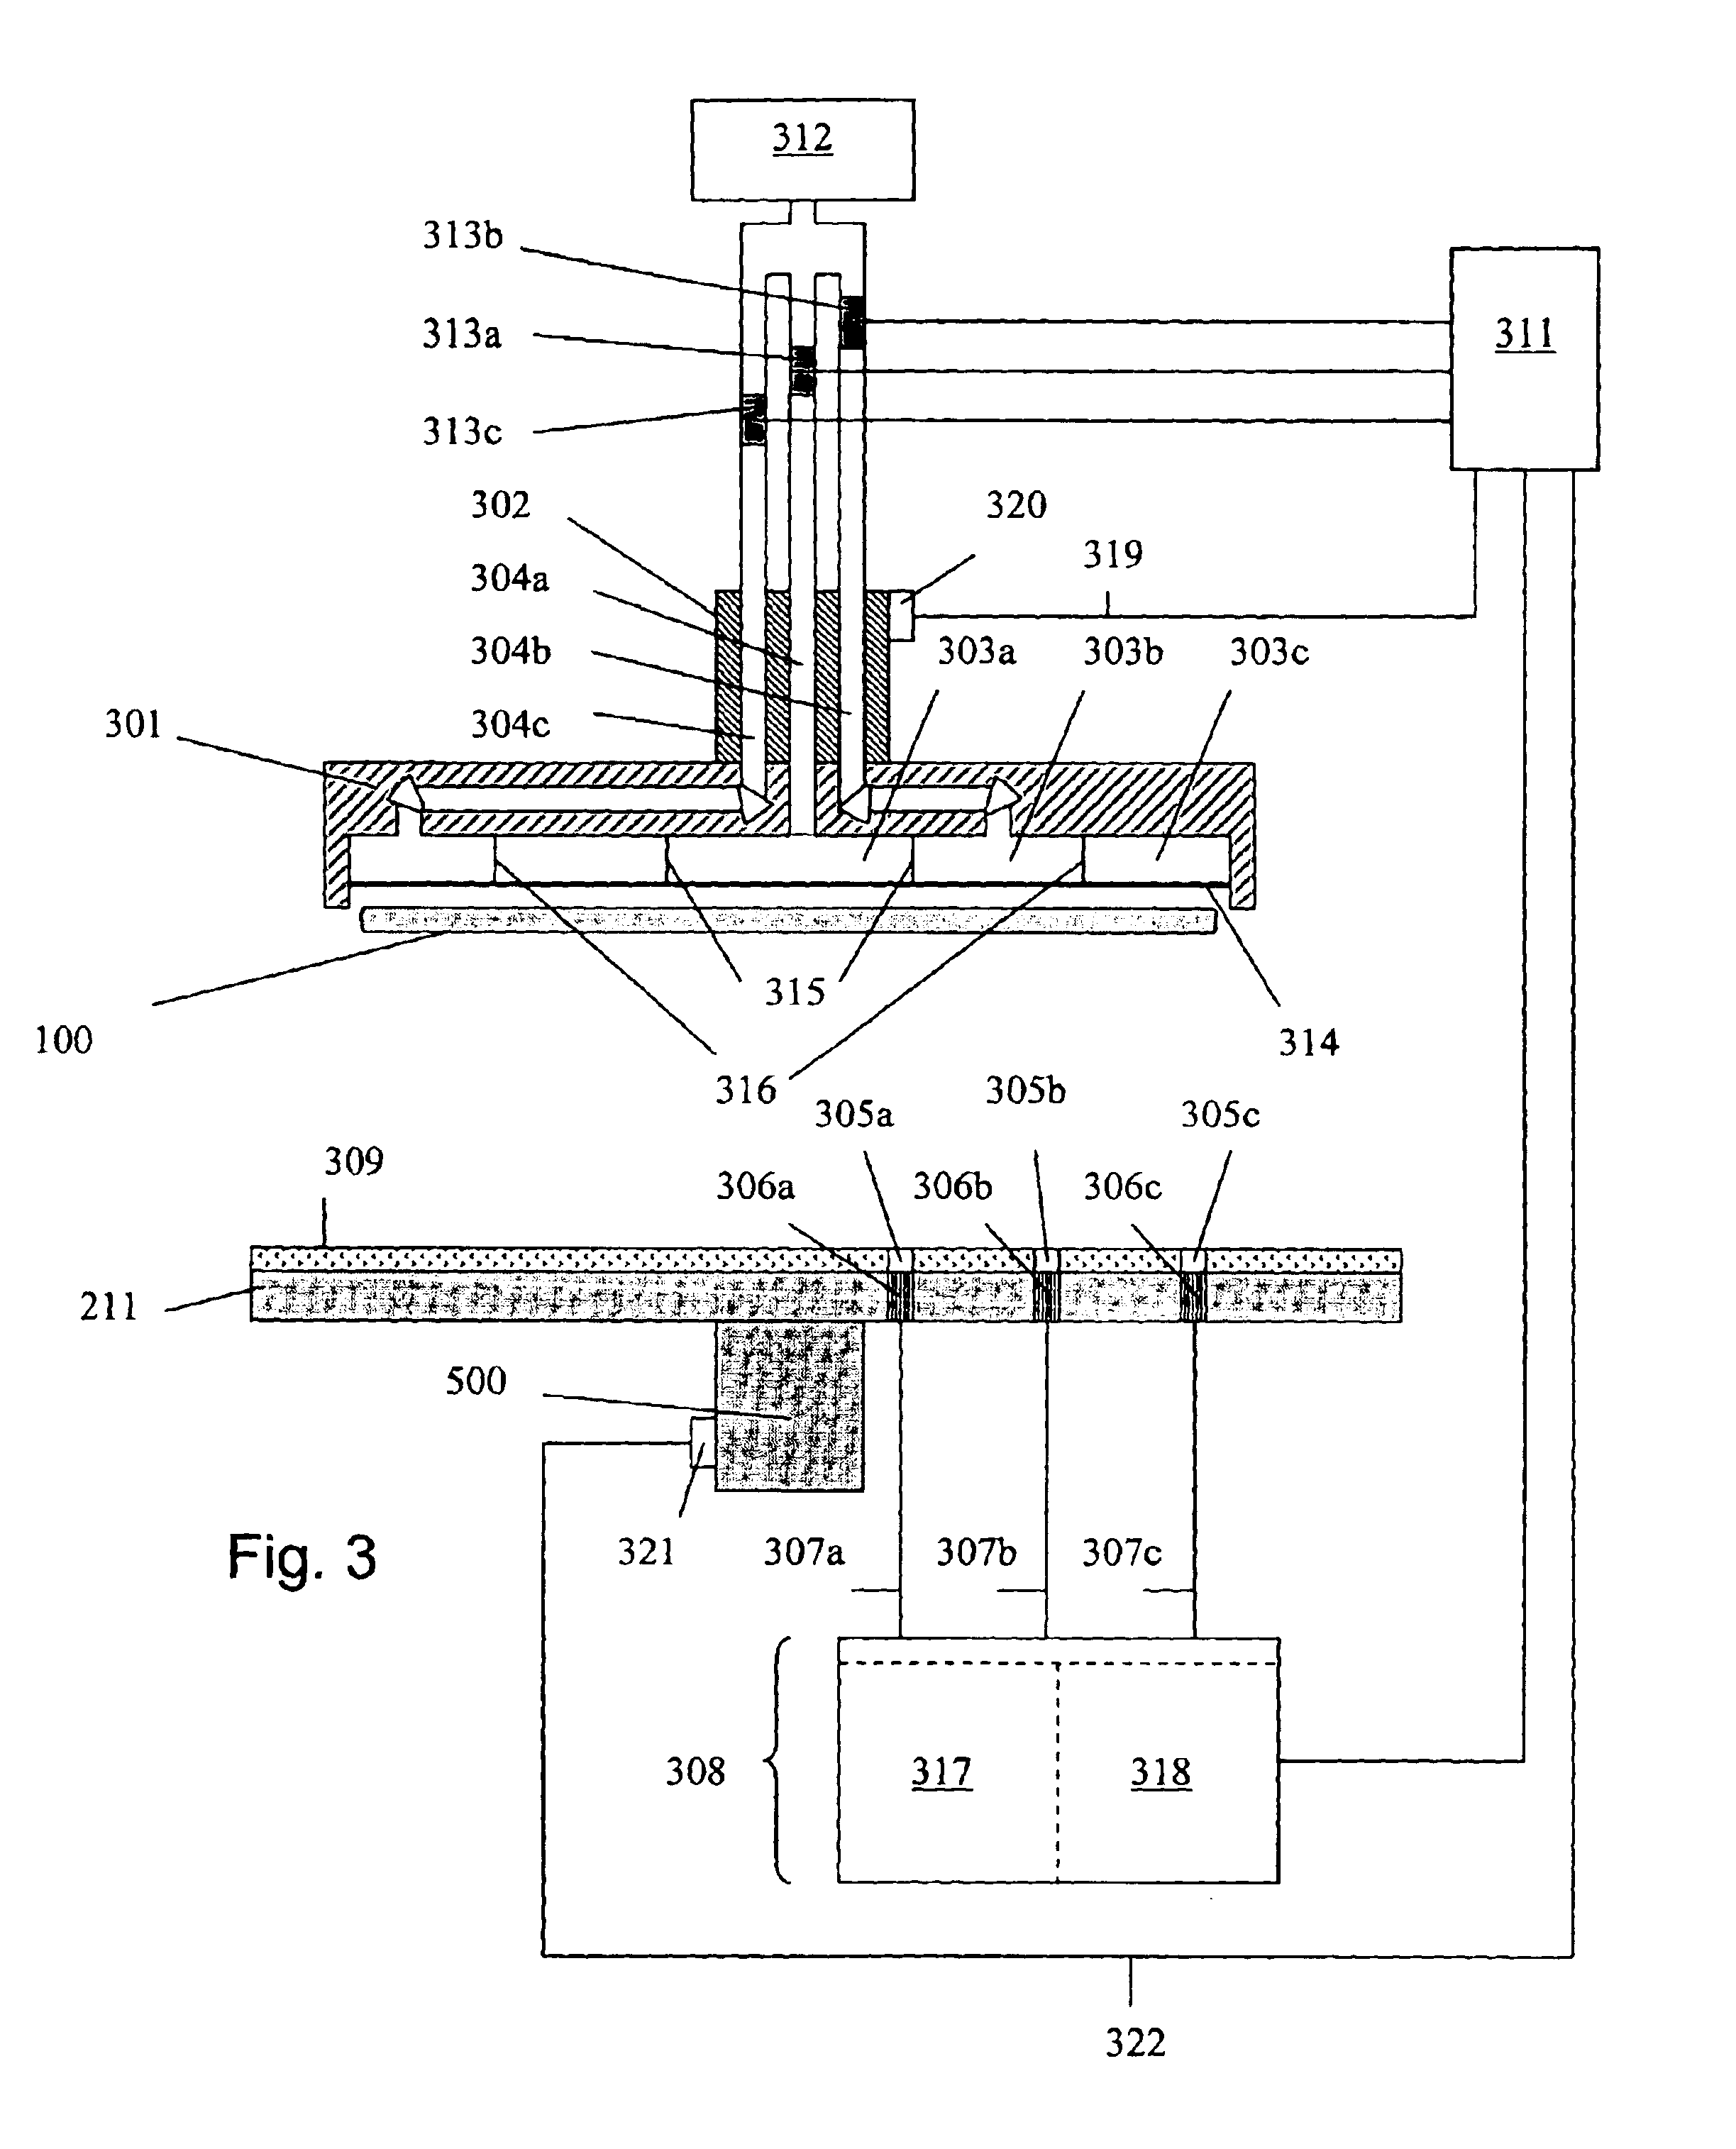 Multiprobe detection system for chemical-mechanical planarization tool